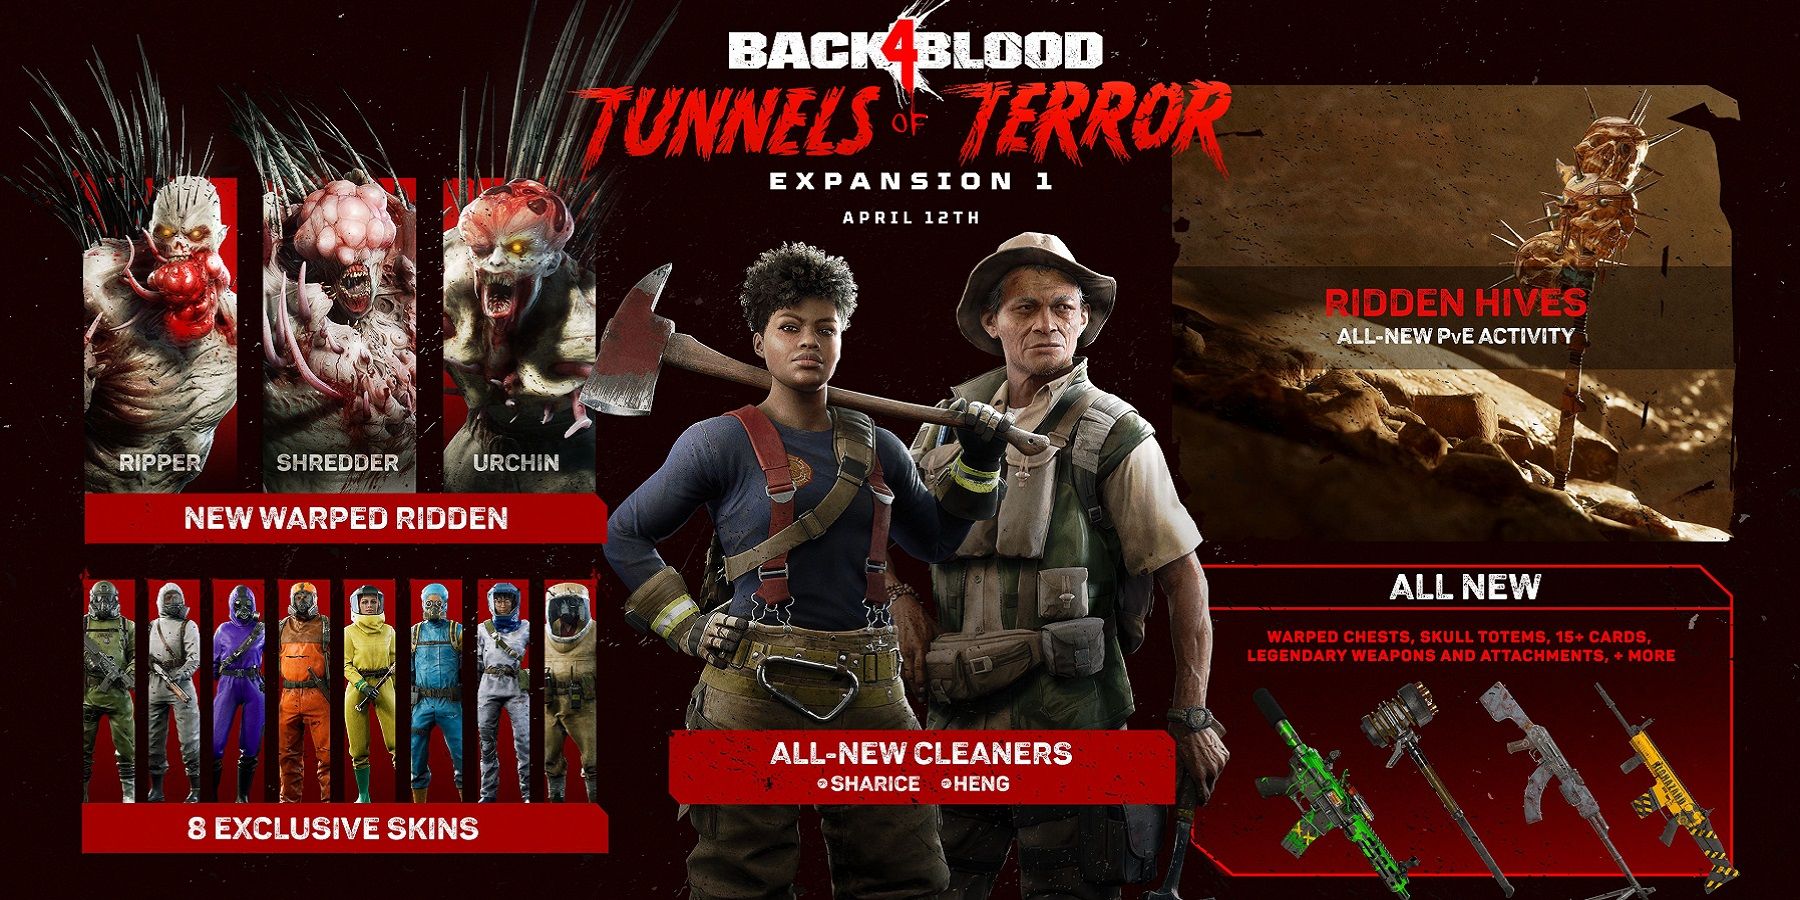 Image showing the upcoming Back 4 Blood DLC "Tunnels of Terorr," depicting two characters surrounded by game assets.